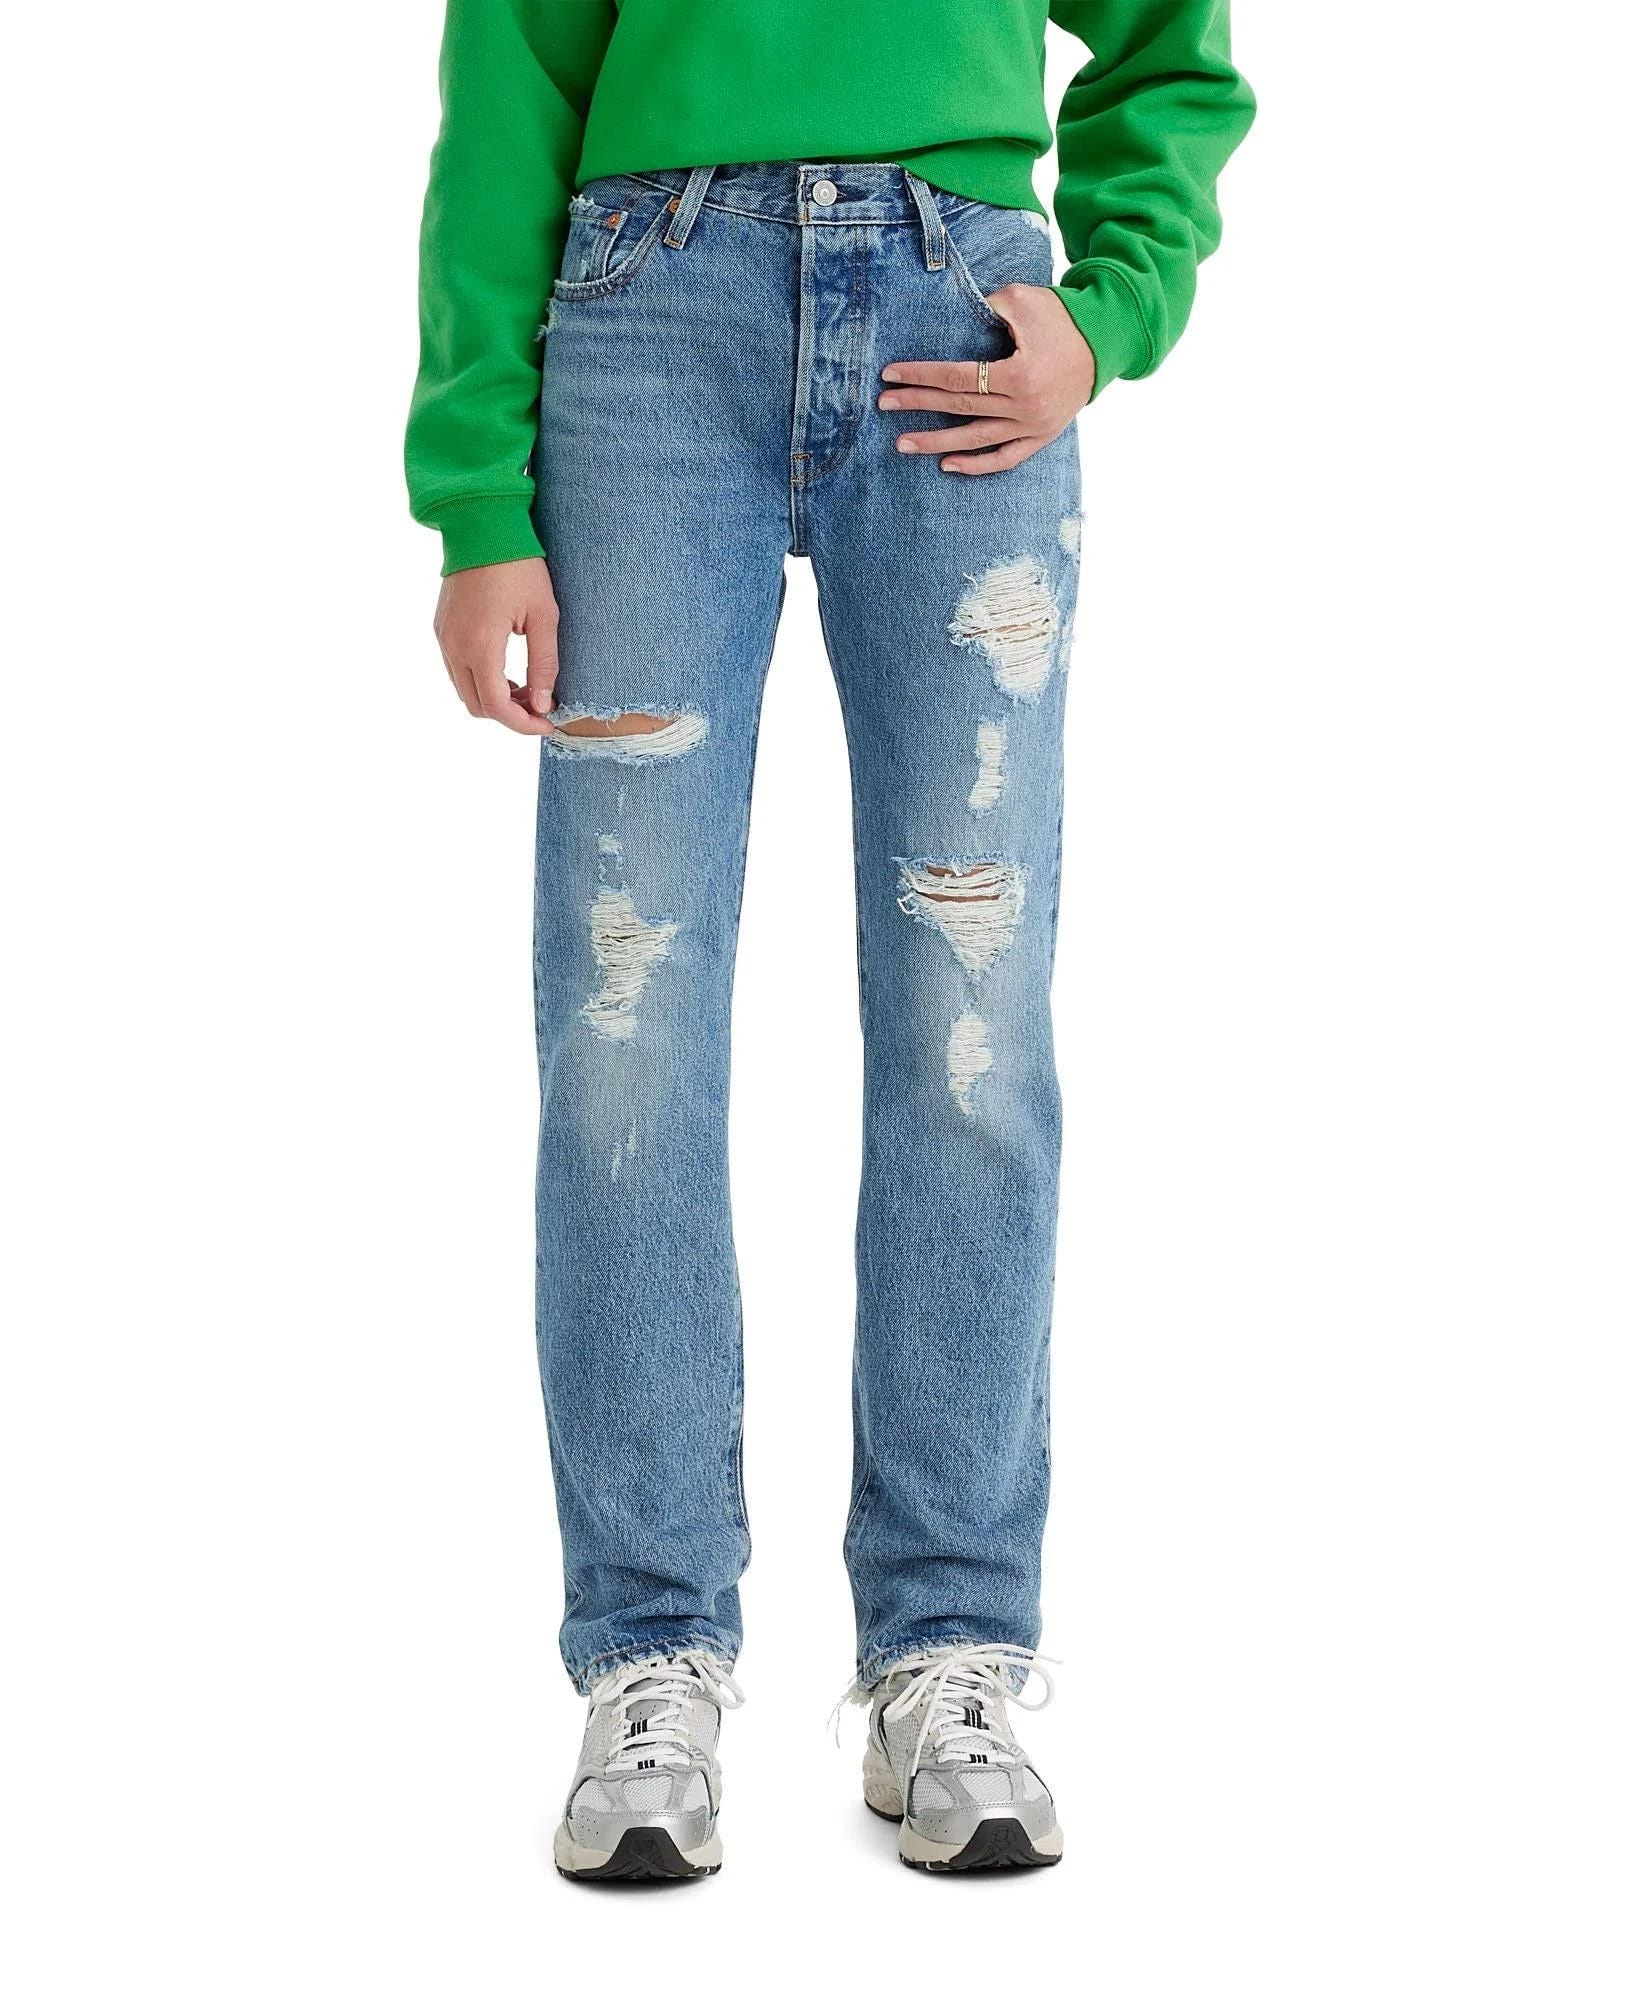 Levi's High Rise Denim Jeans for Women: Classic Style and Comfort | Image